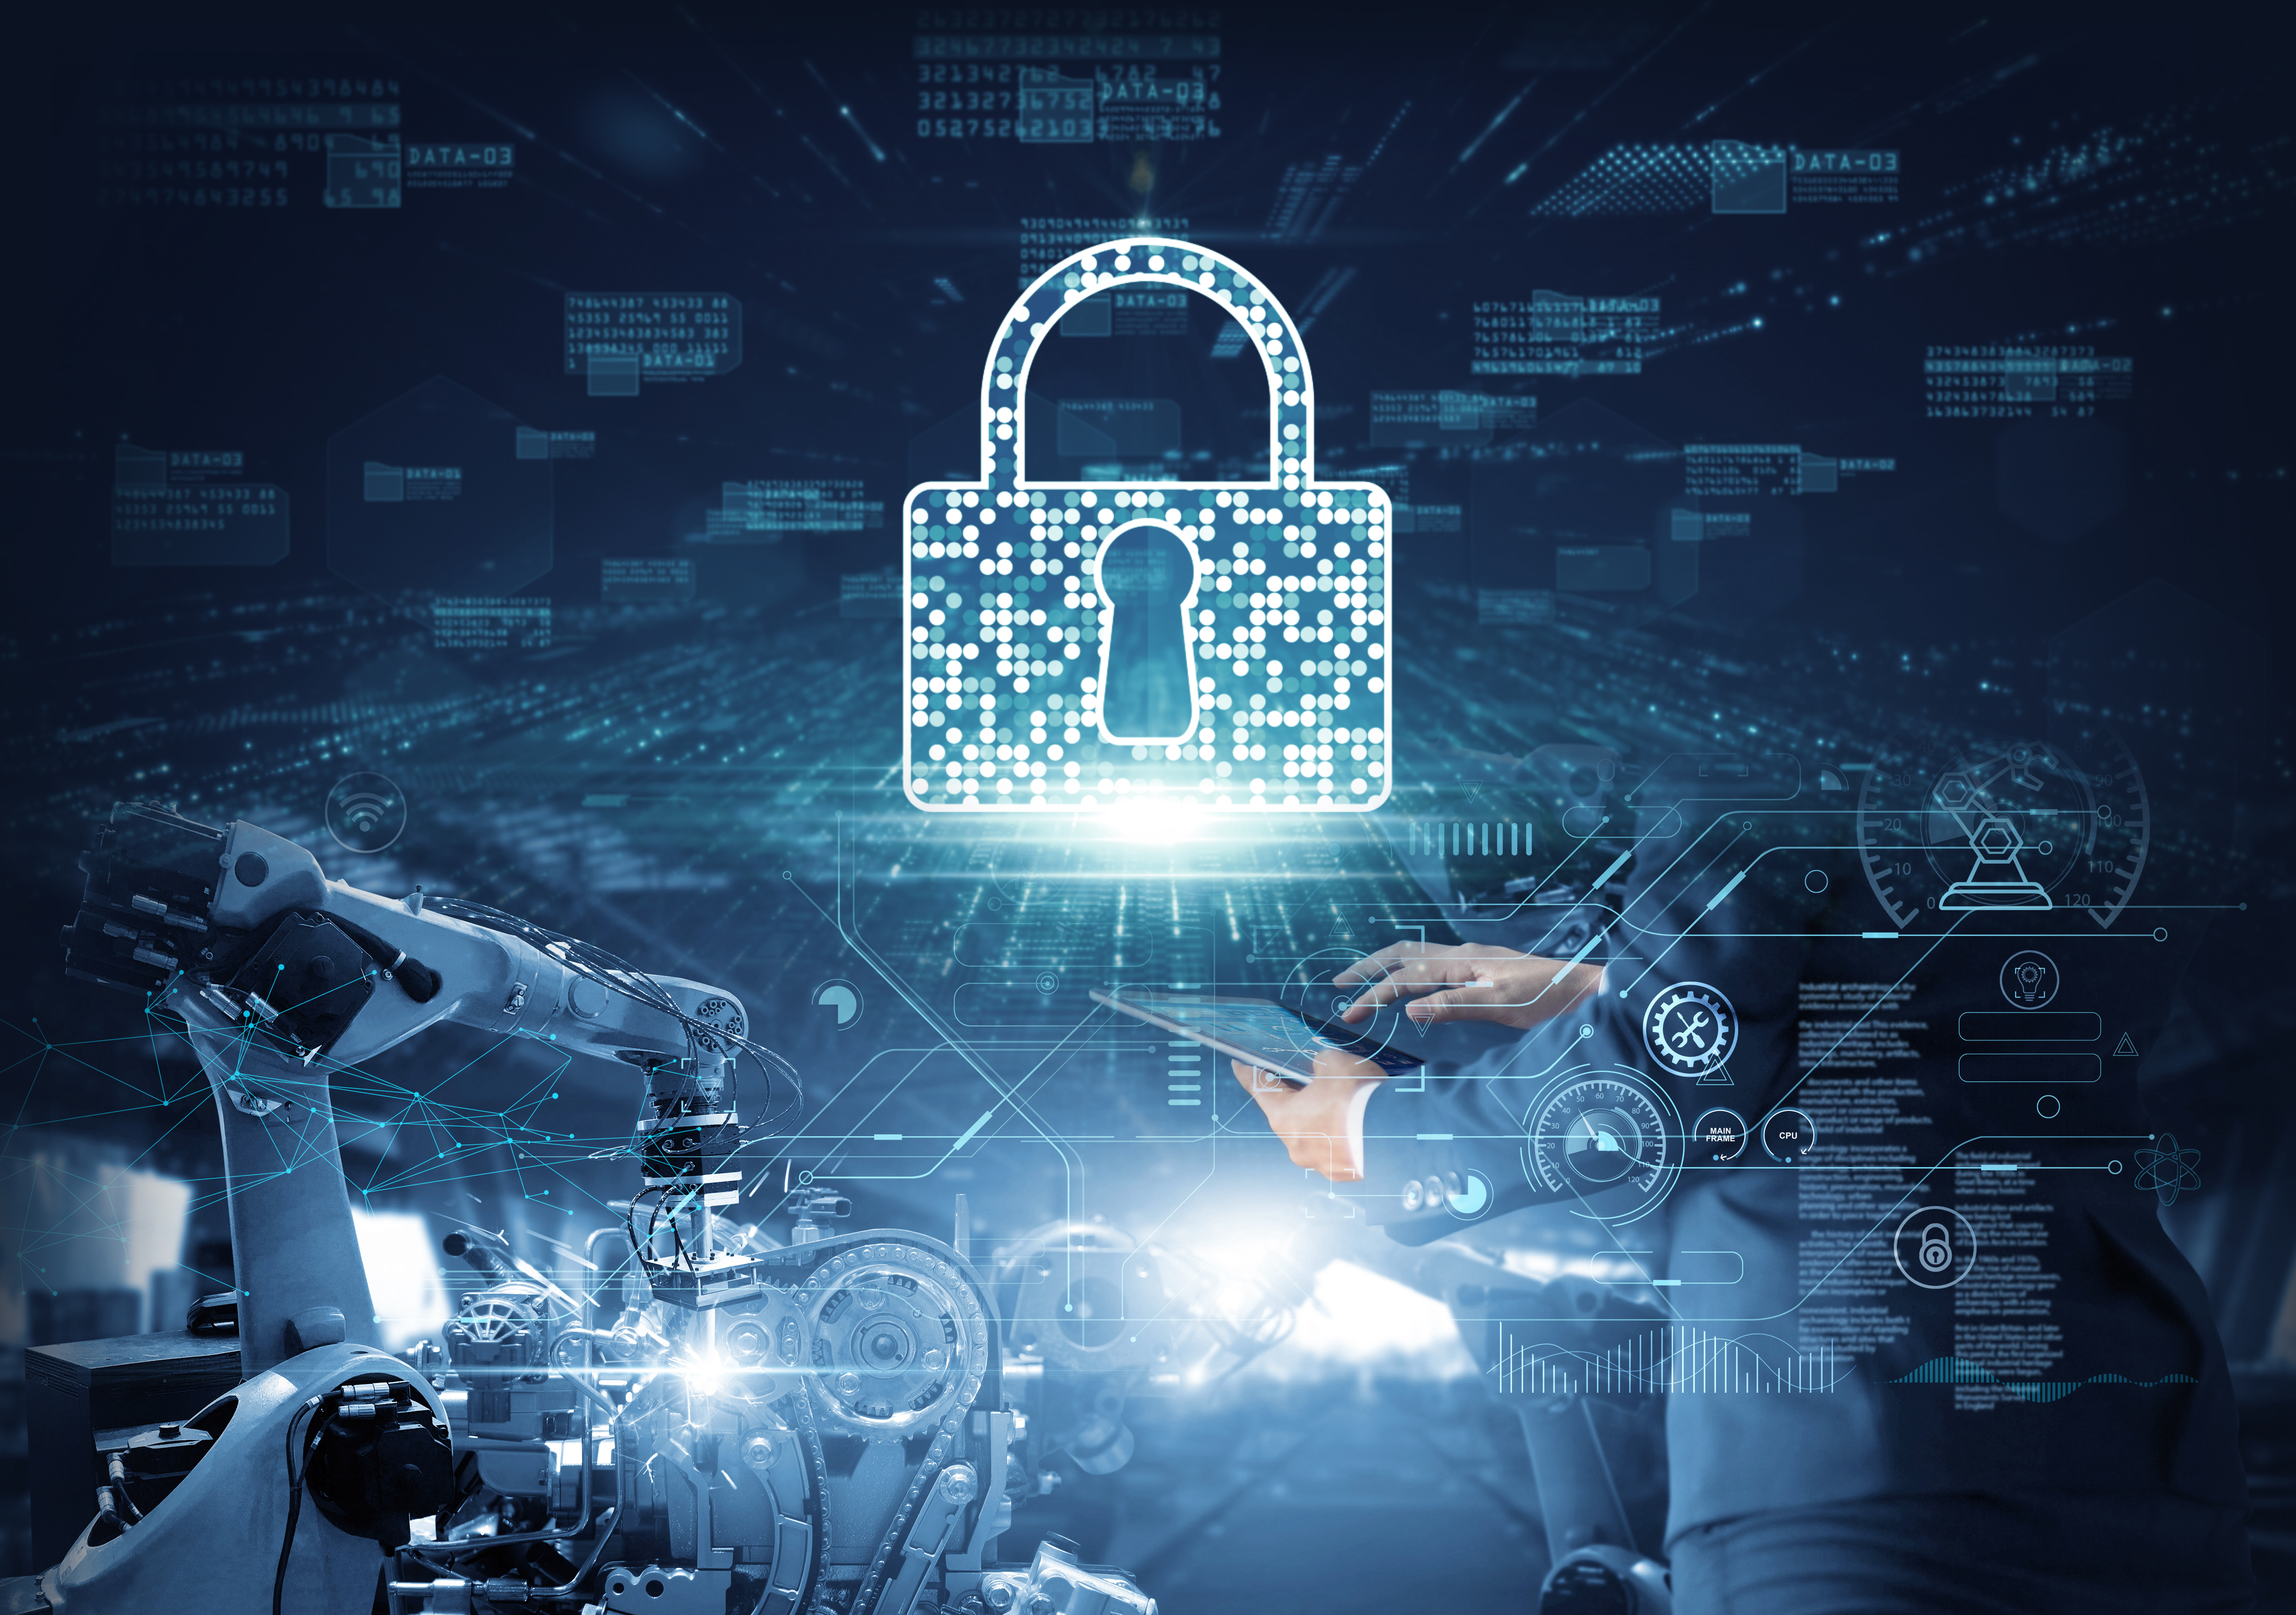 Automation system integrators and end users can set up future-oriented IIoT networks while minimizing the risk of cyber threats.